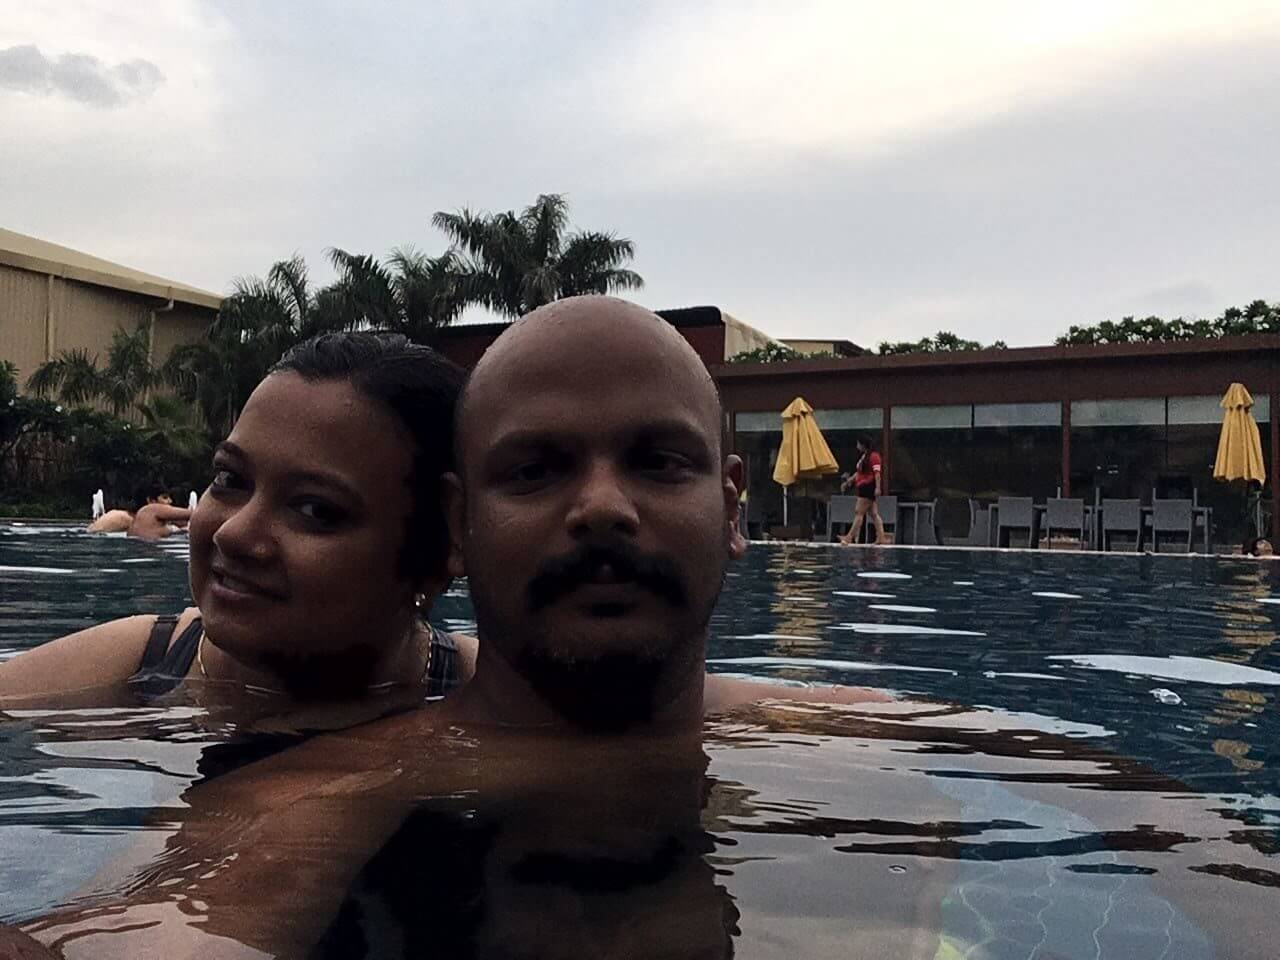 Author & partner at the pool of Umrao